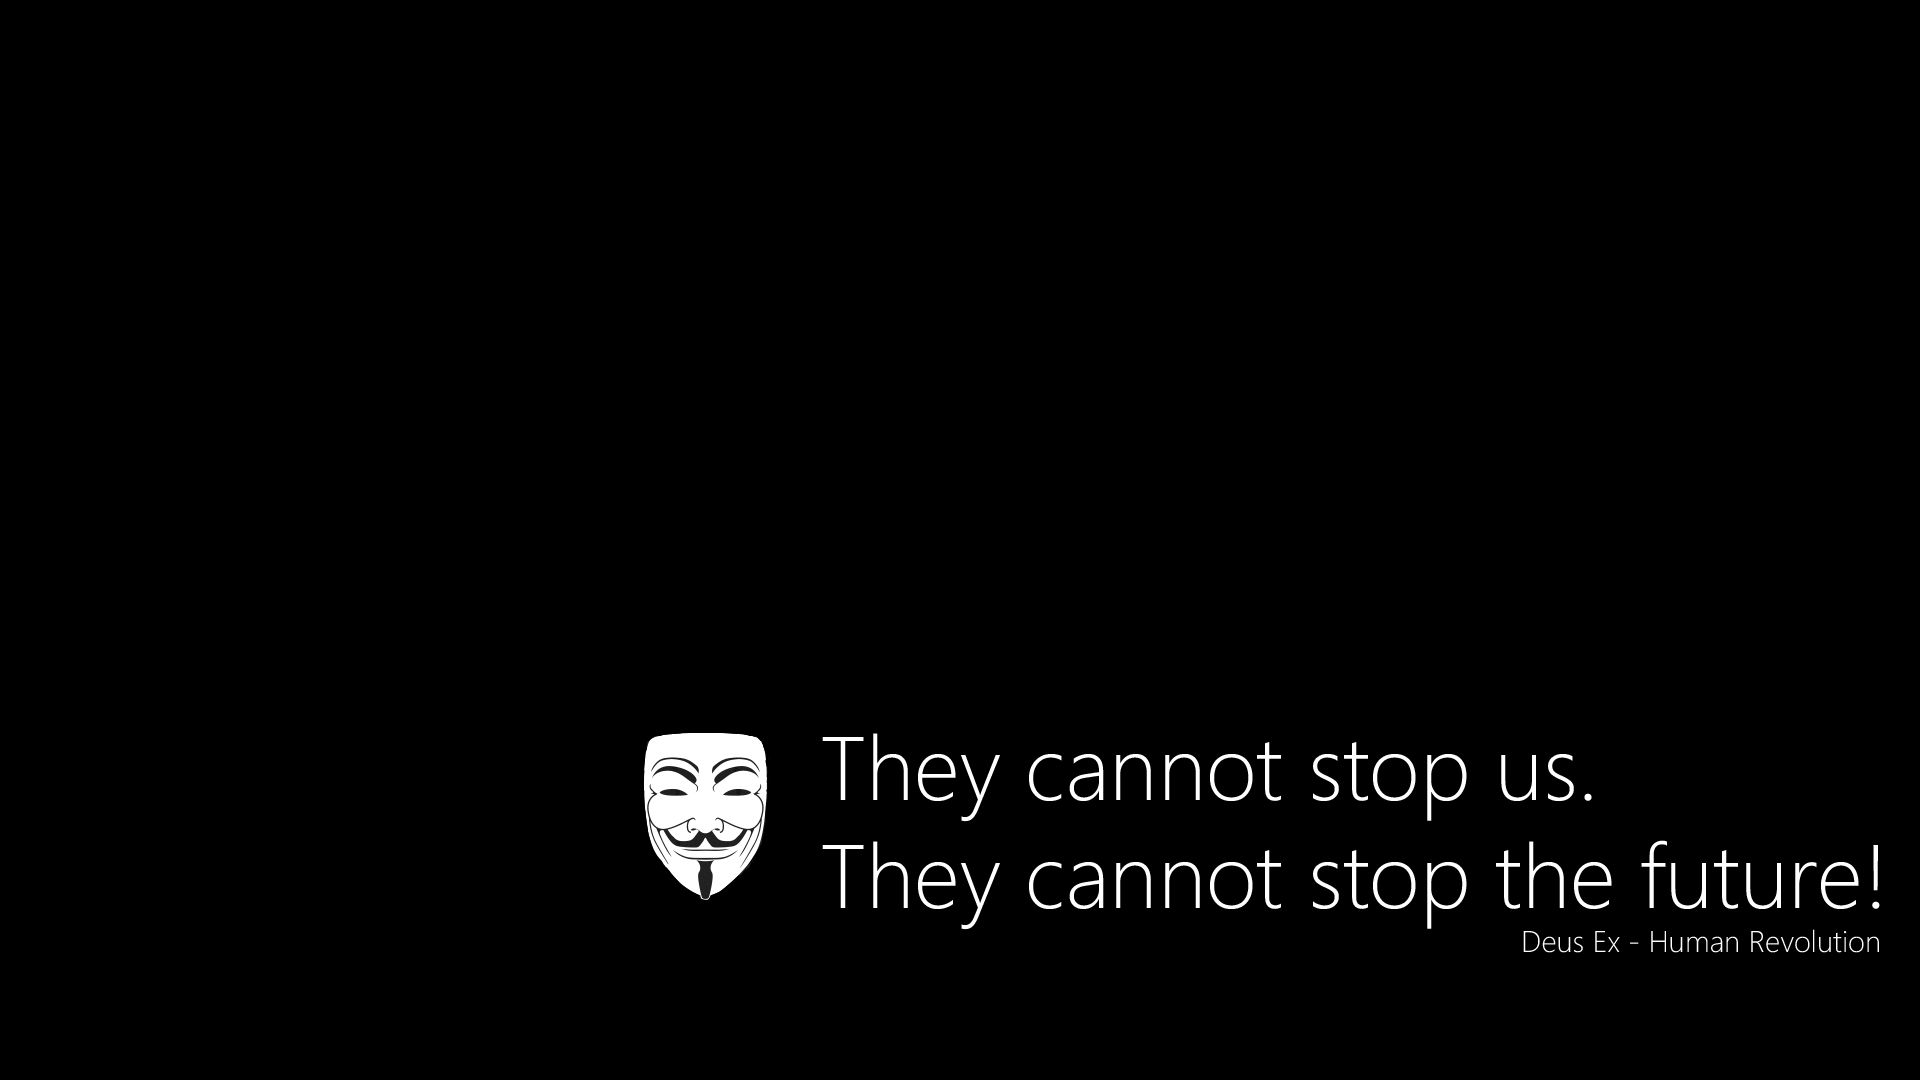 Anonymous - They cannot stop us by Medowar